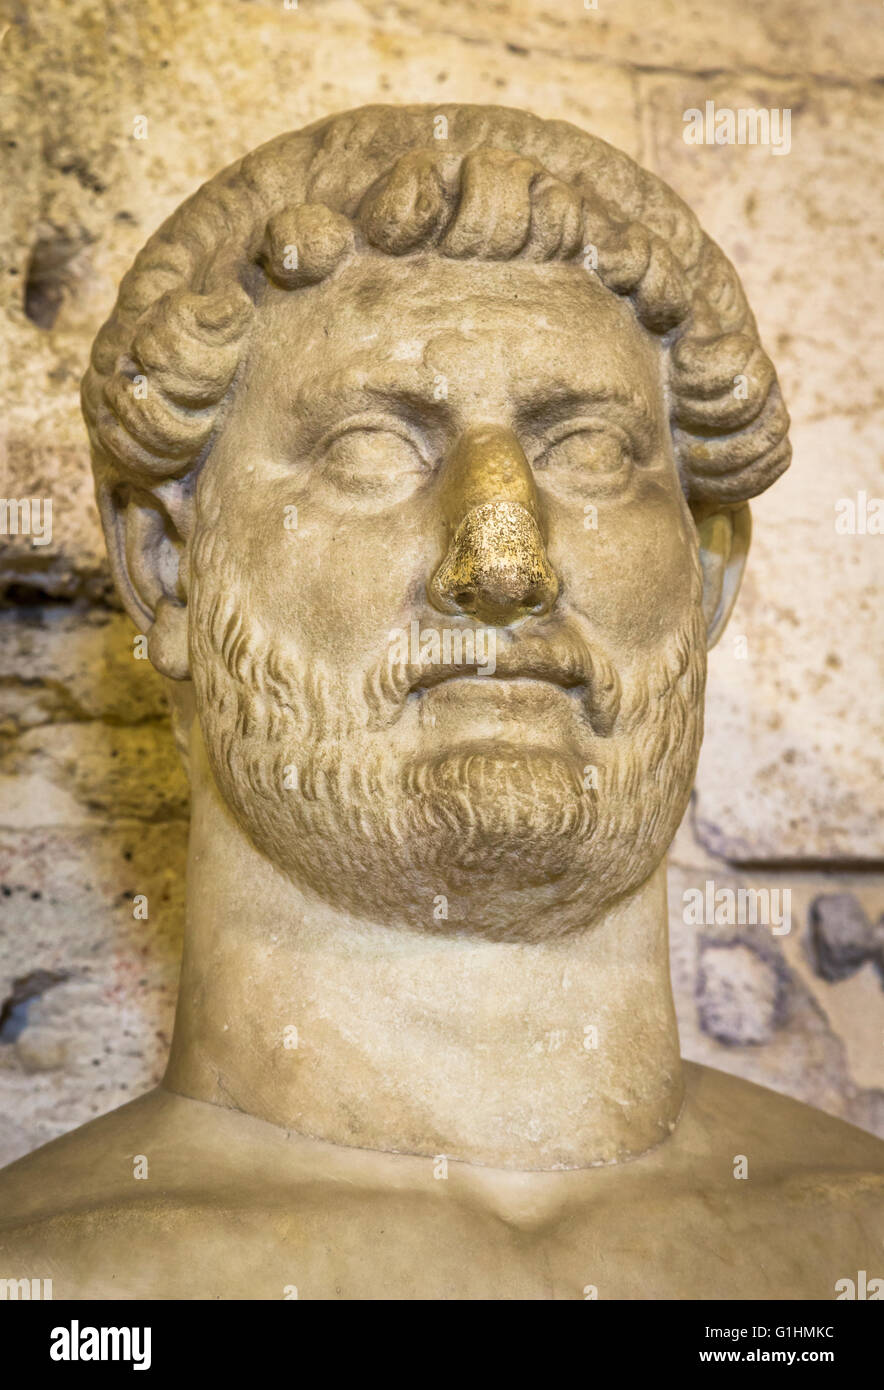 Marble bust of the Roman Emperor Hadrian (76 - 138 AD) dating from the 2nd century AD on display in Castel Sant' Angelo, Rome Stock Photo